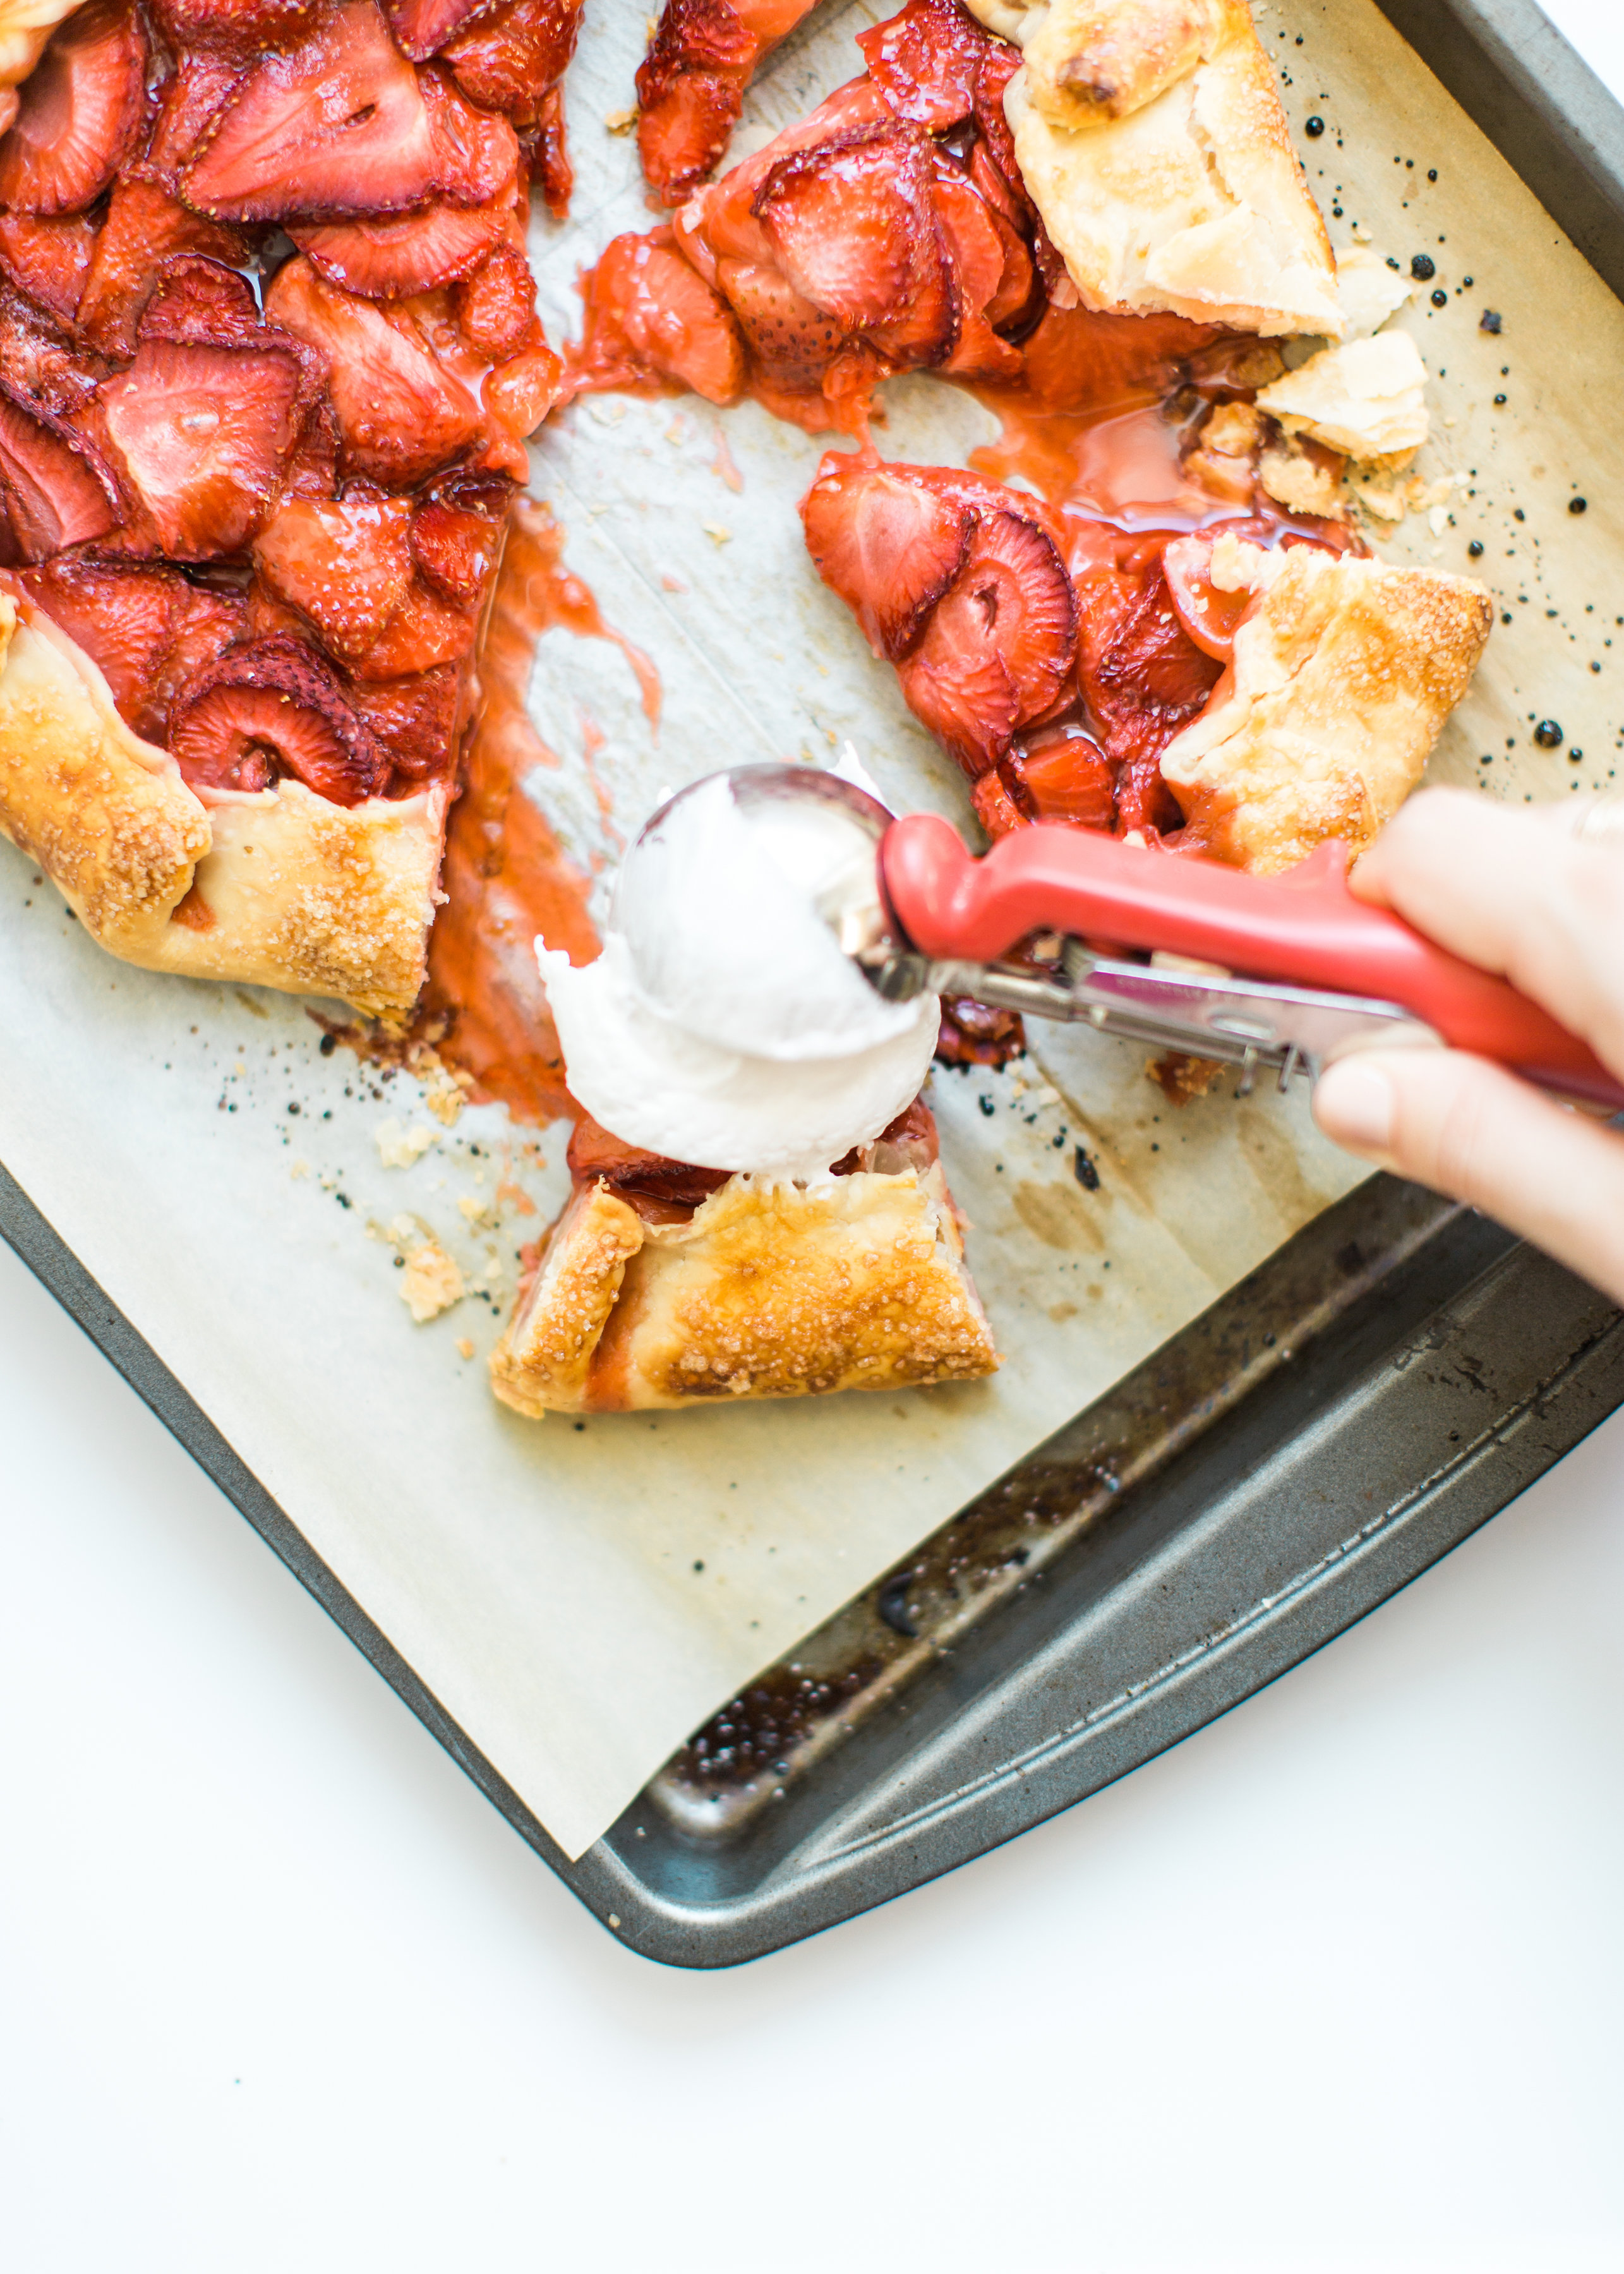 Flaky pie dough, a sweet jam and fresh strawberry filling, and a sprinkling of turbinado sugar on the crust, makes this simple strawberry galette or crostata, a.k.a., pie made easy using store-bought crust, the stuff of dreams. Click through for the recipe. #pie #strawberrypie #strawberrygalette #strawberrycrostata #crostata #galette #simplesummerdessert #summerdessert #springdessert #simpledessert #easydessert #easypie #simplepie | glitterinc.com | @glitterinc